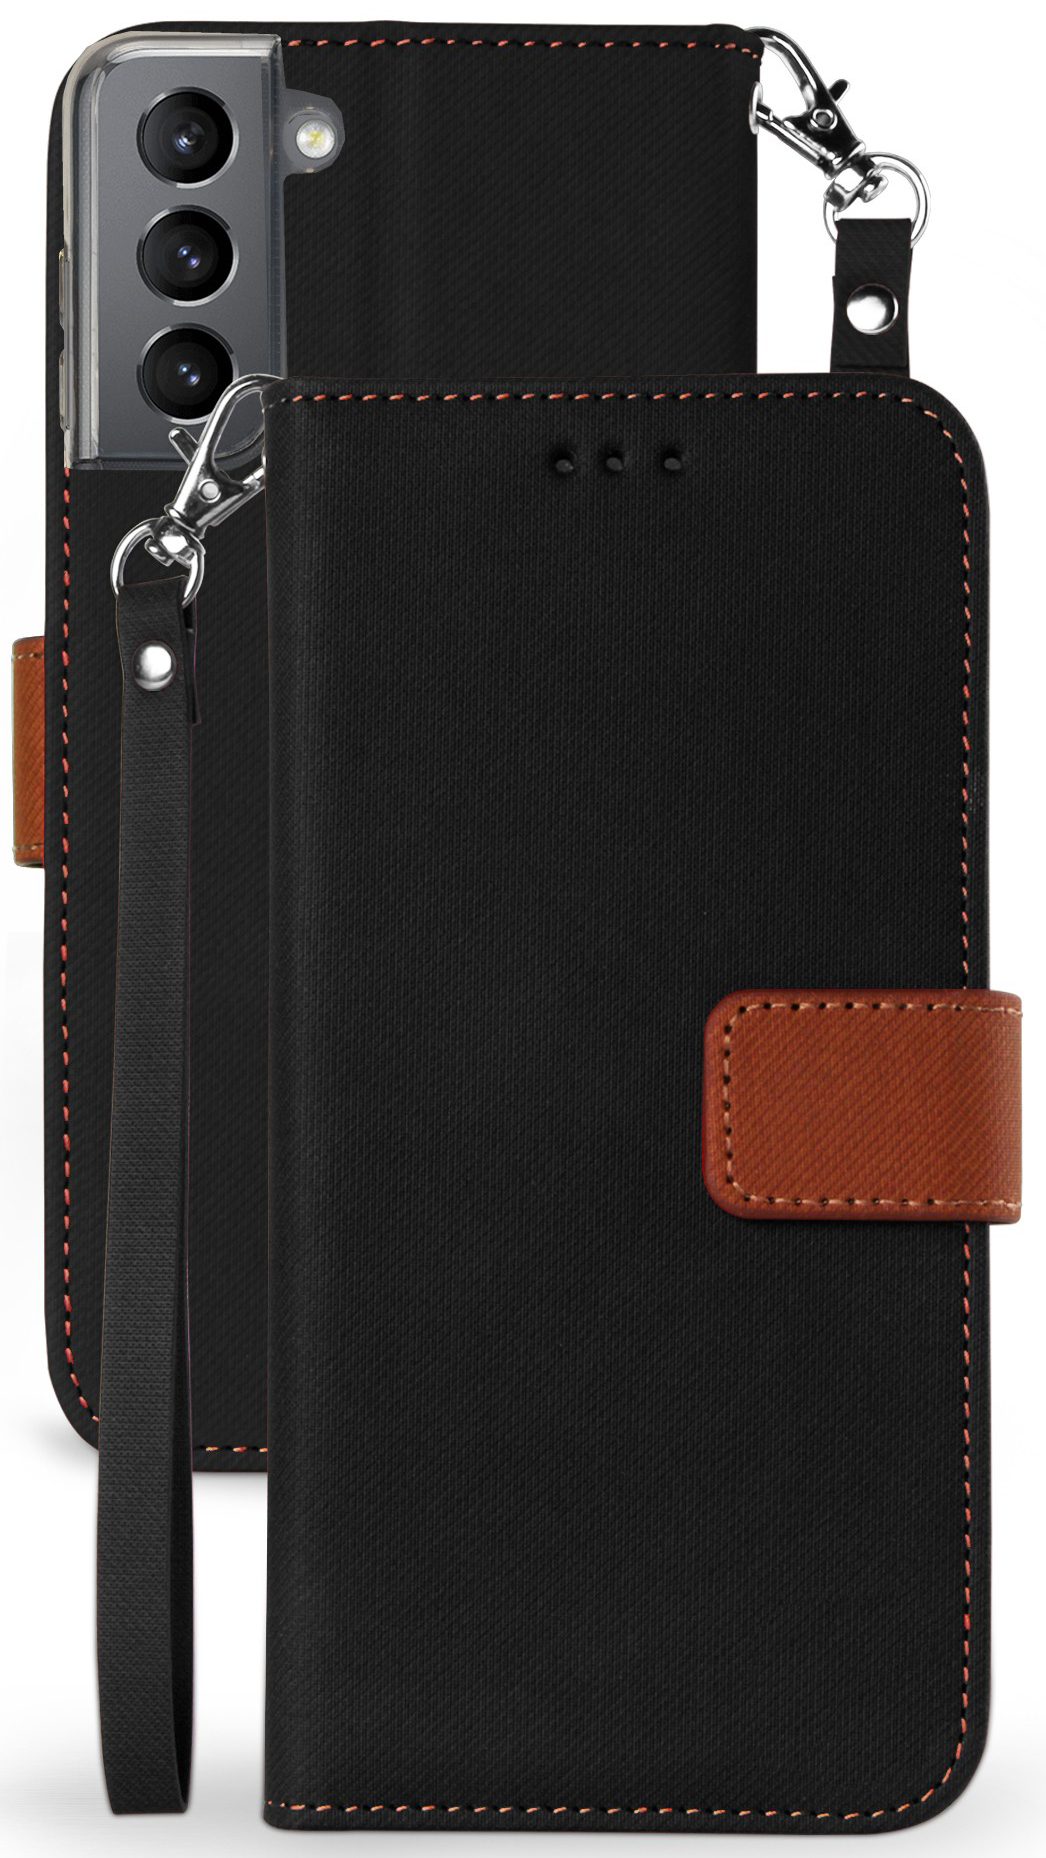 Wallet Phone Case for Galaxy S21 5G, [Black/Brown] Folio Credit Card Slot ID Cover, View Stand [with Magnetic Closure, Wrist Strap Lanyard] for Samsung Galaxy S21 5G (SM-G991) - image 1 of 8